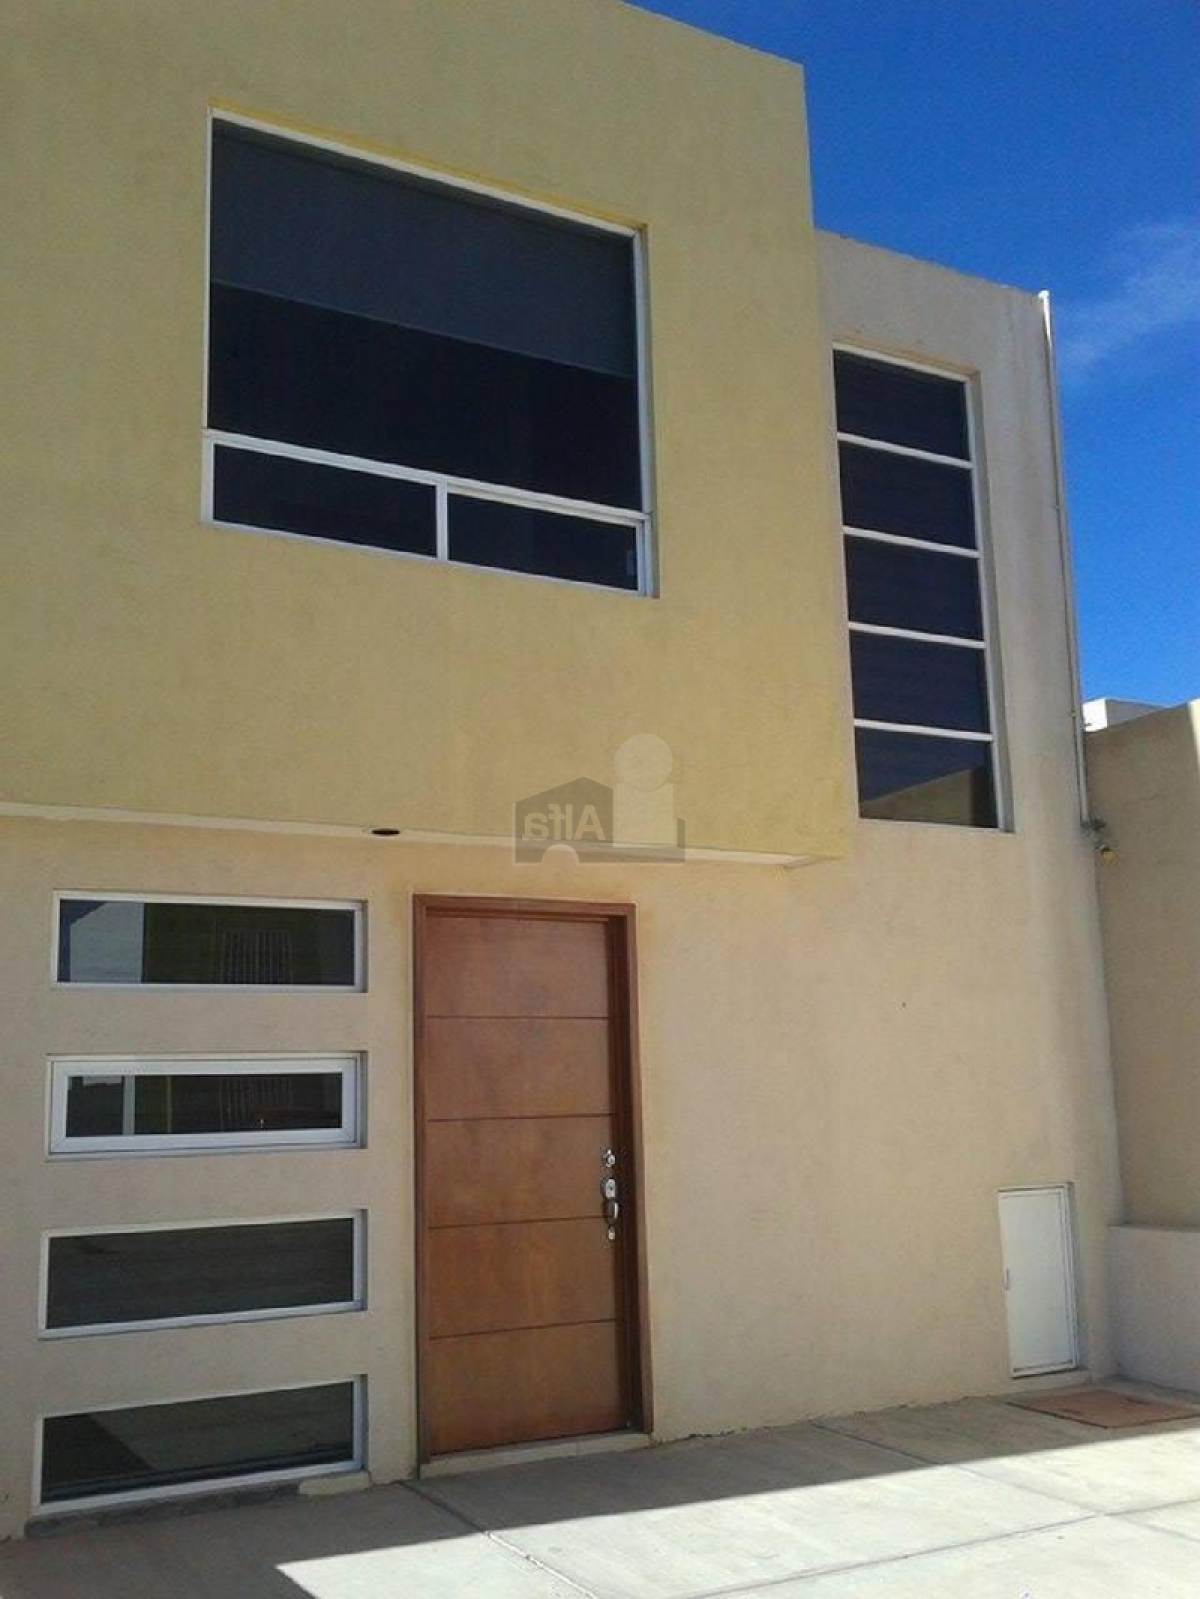 Picture of Home For Sale in Zacatecas, Zacatecas, Mexico